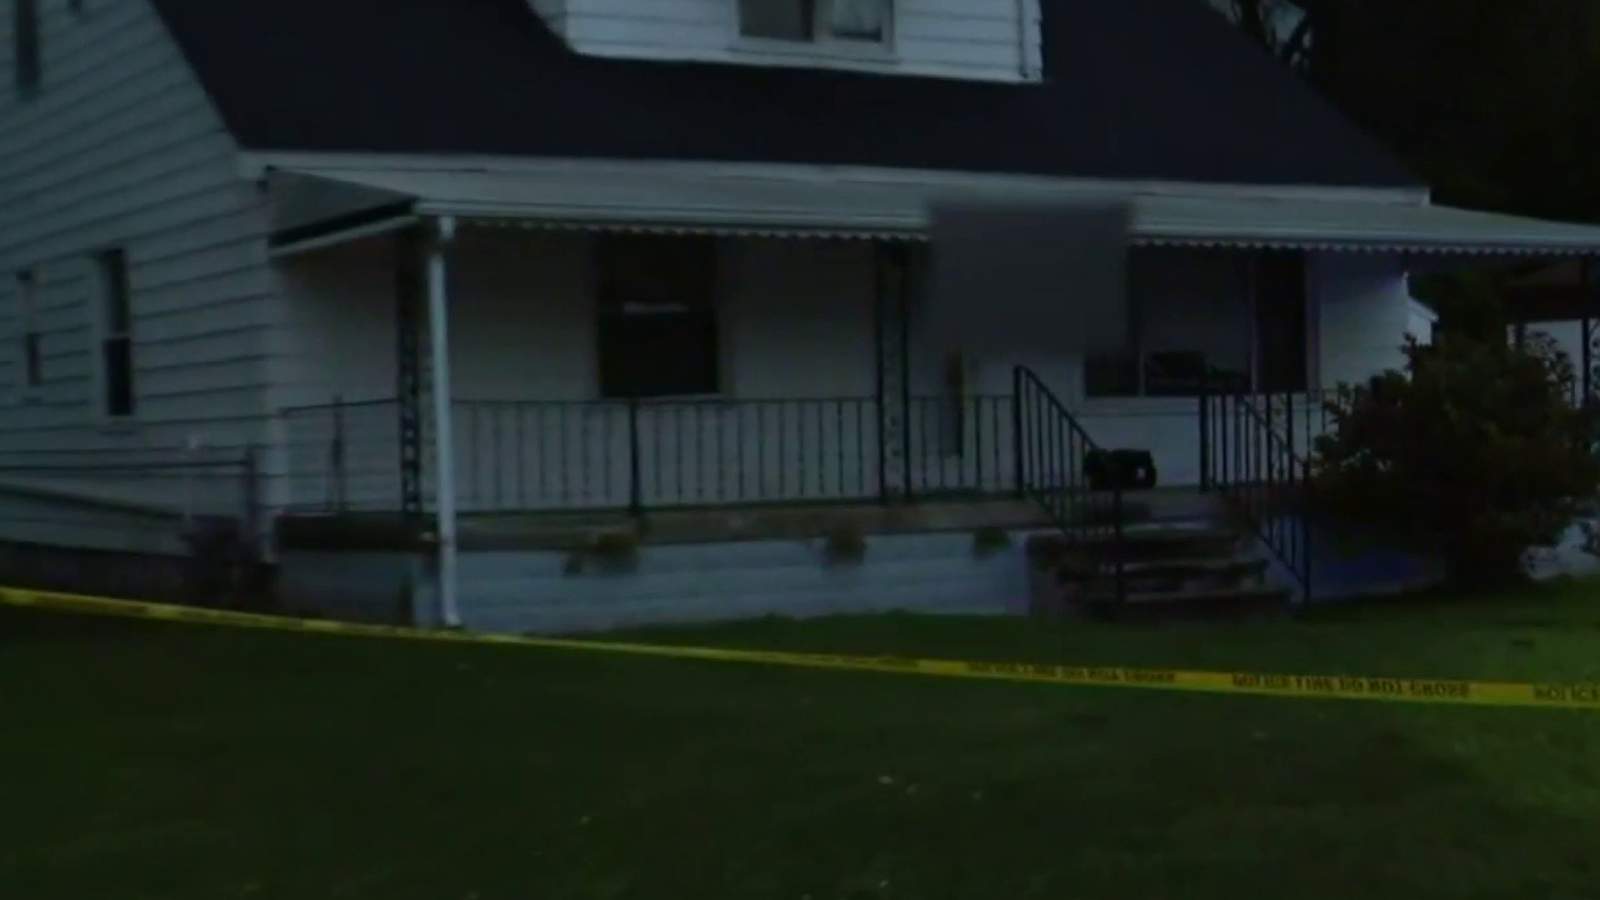 17-year-old mother found shot to death in Eastpointe home